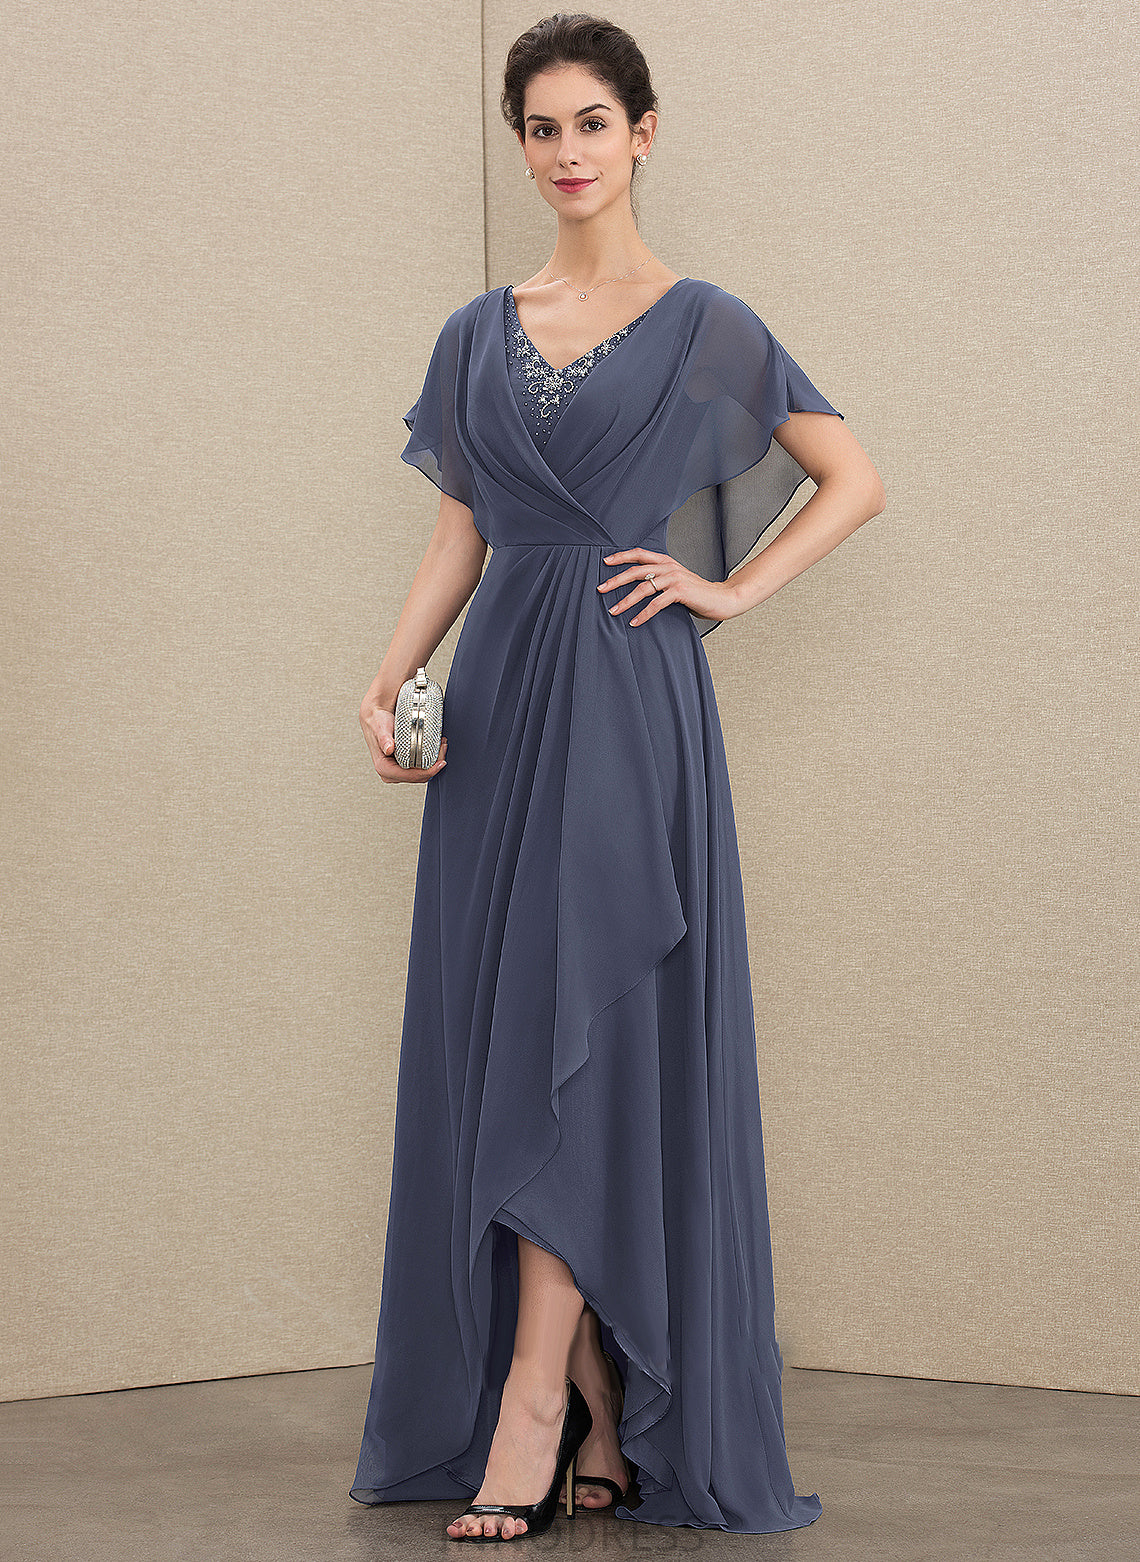 Sequins the A-Line Dress Mother Asymmetrical Mother of the Bride Dresses Chiffon Bride V-neck of Beading Edith With